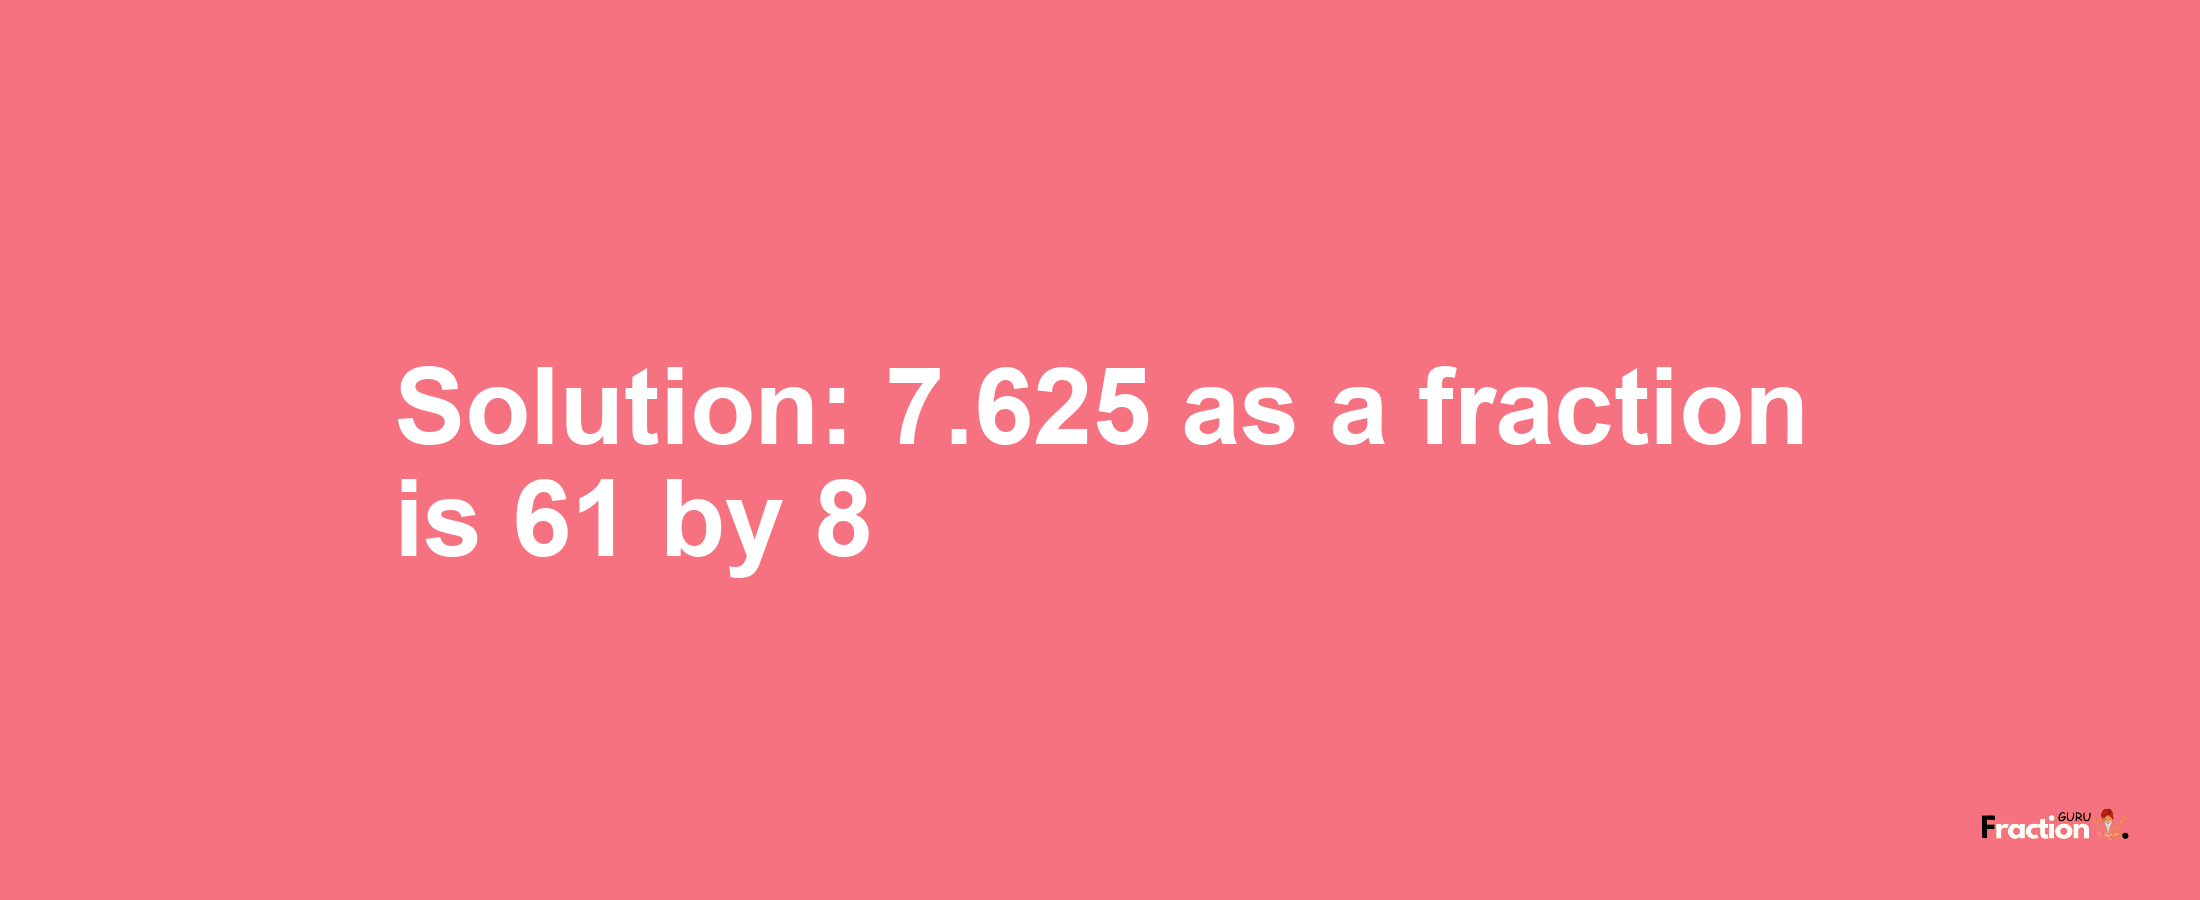 Solution:7.625 as a fraction is 61/8